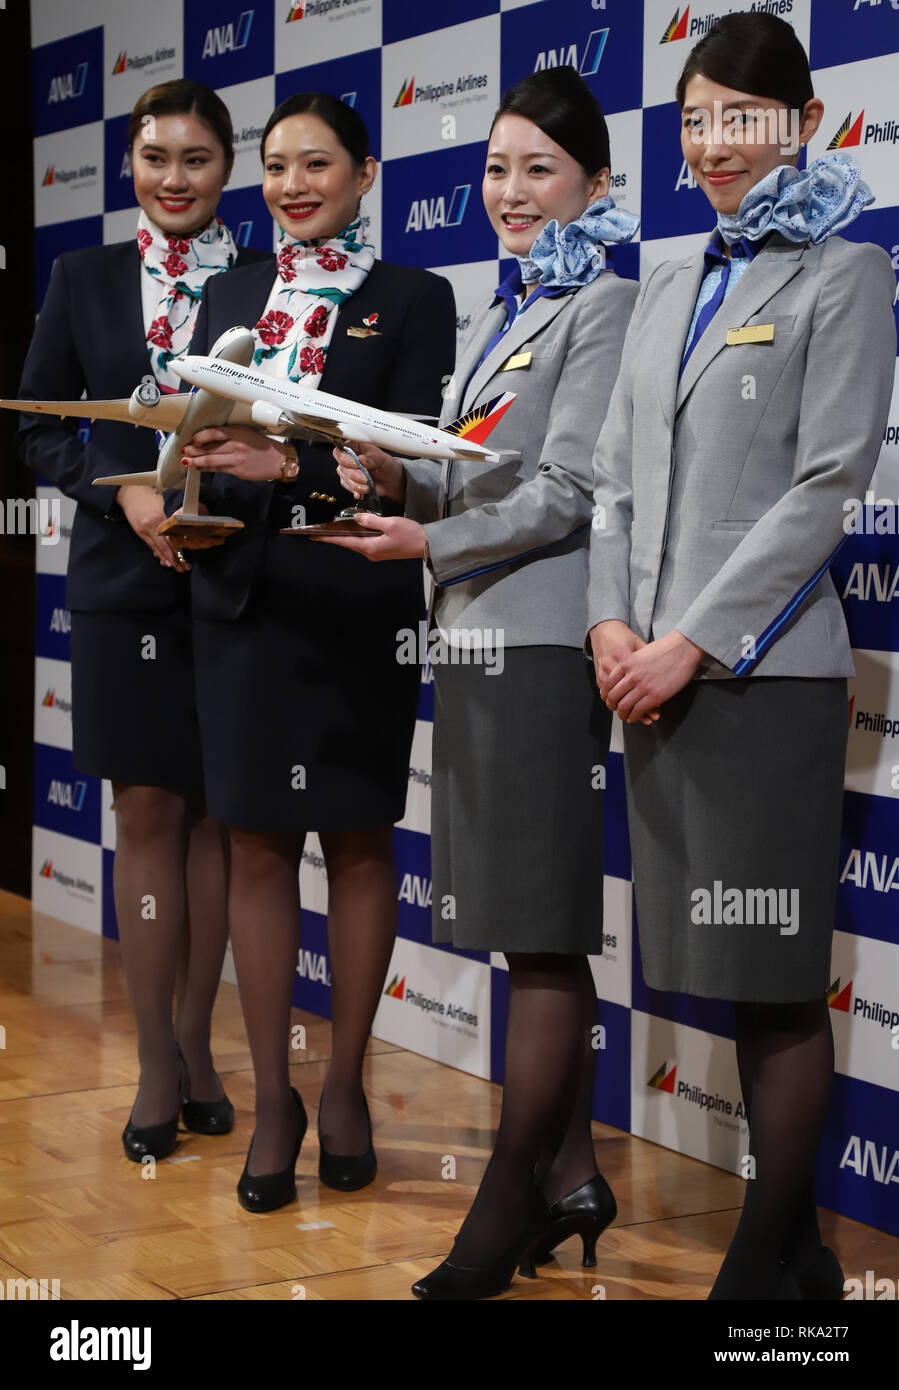 Tokyo, Japan. 8th Feb, 2019. Cabin attendants of Philippine Airlines (PAL) and All Nippon Airways (ANA) smile as they announce the companies expand their partnerships in Tokyo on Friday, February 8, 2019. ANA Holdings will invest 95 million U.S. dollars to PAL Holdings and acquire 9.5 percent of PAL Holdings shares. Credit: Yoshio Tsunoda/AFLO/Alamy Live News Stock Photo